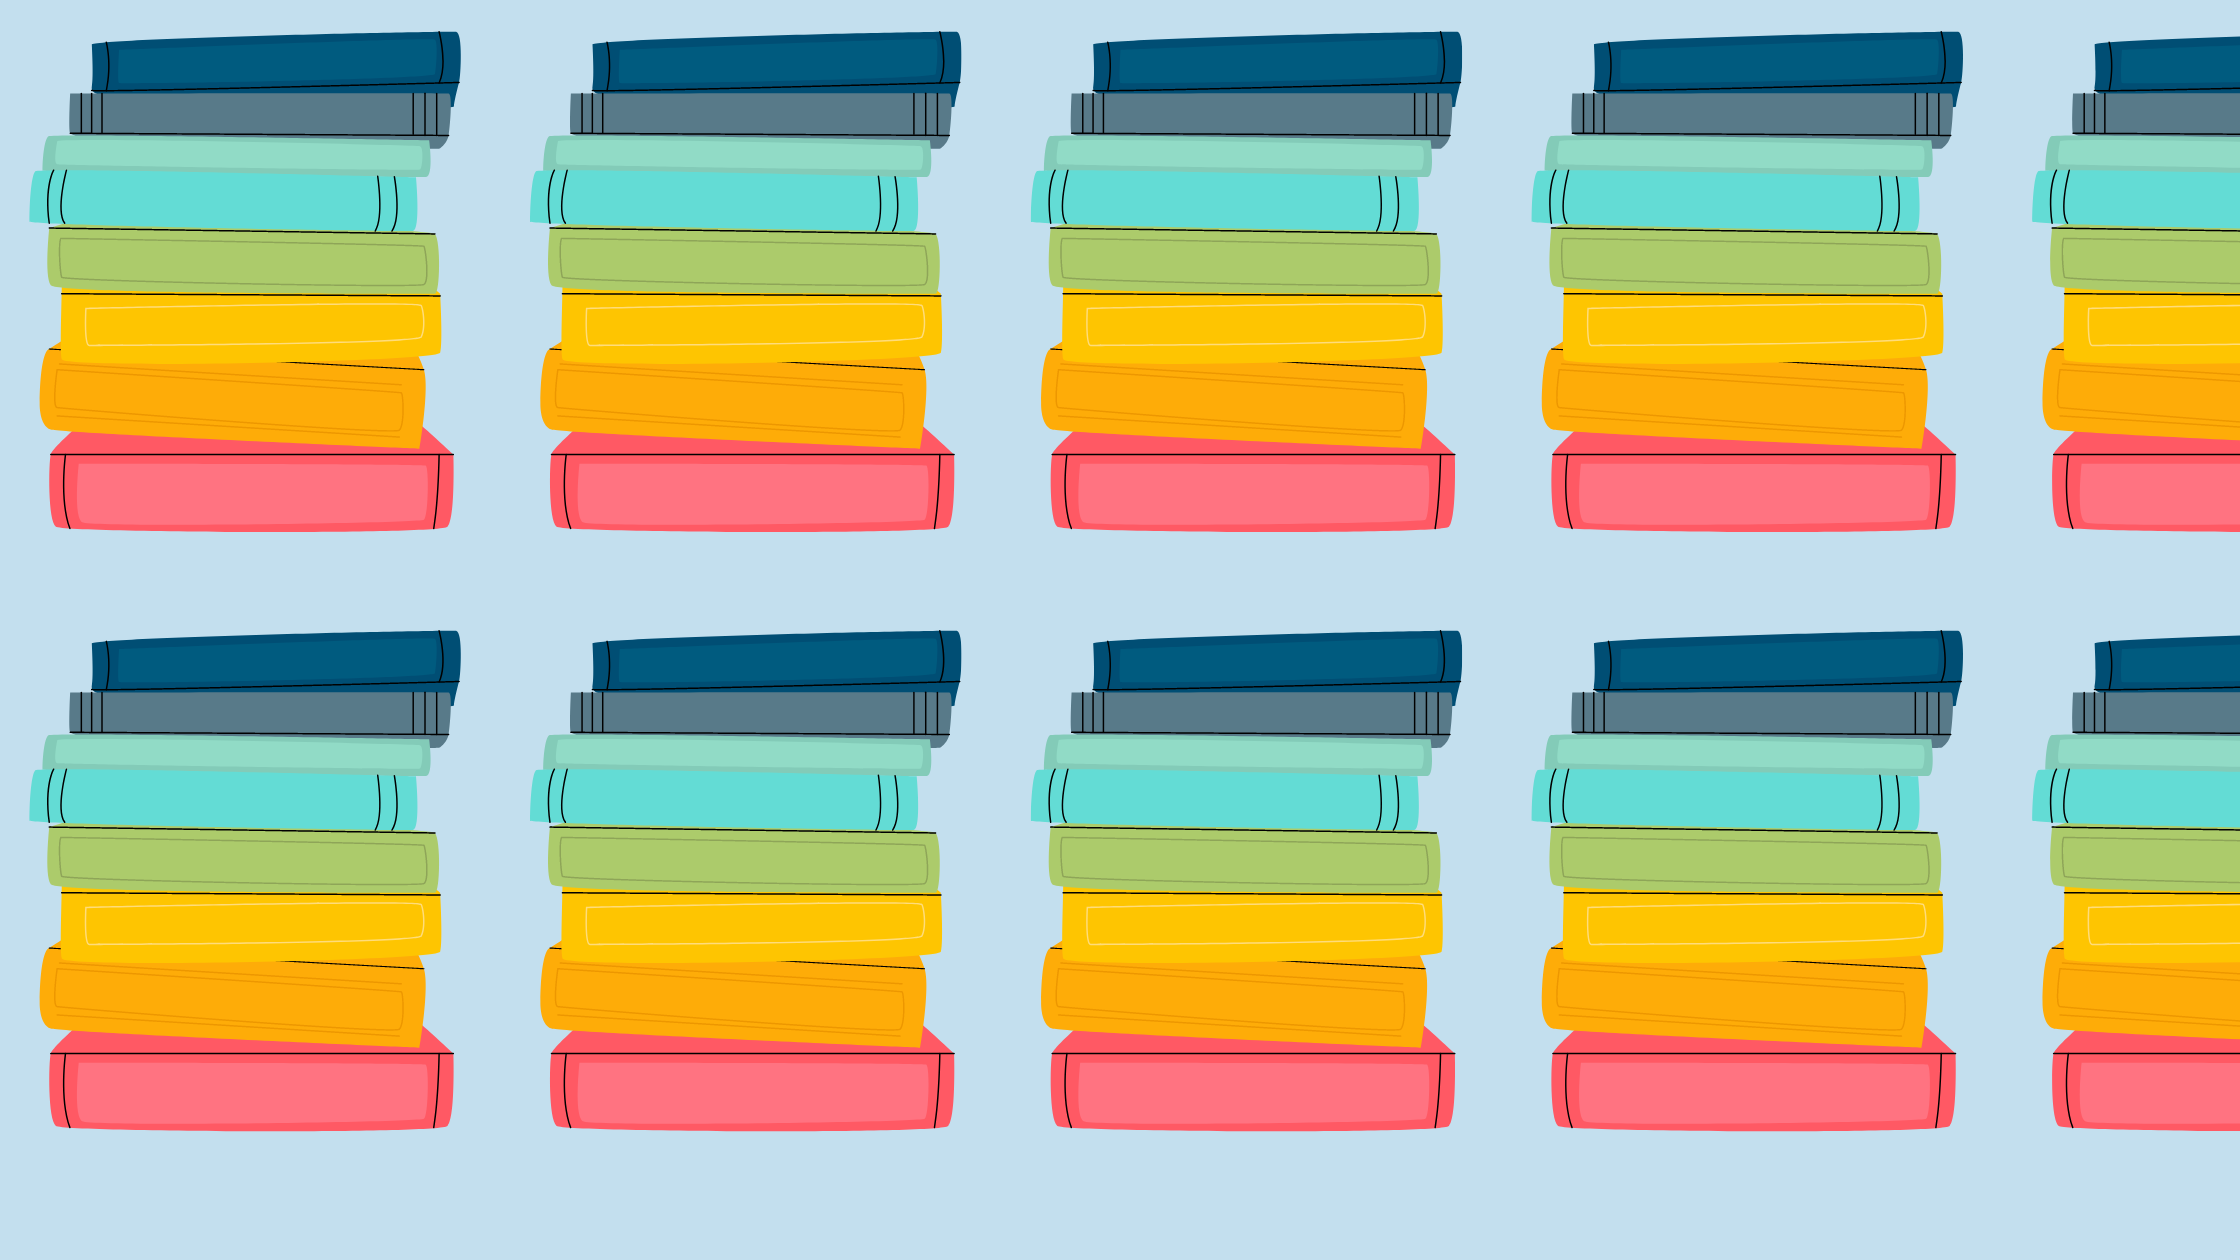 Rainbow colored stacks of books